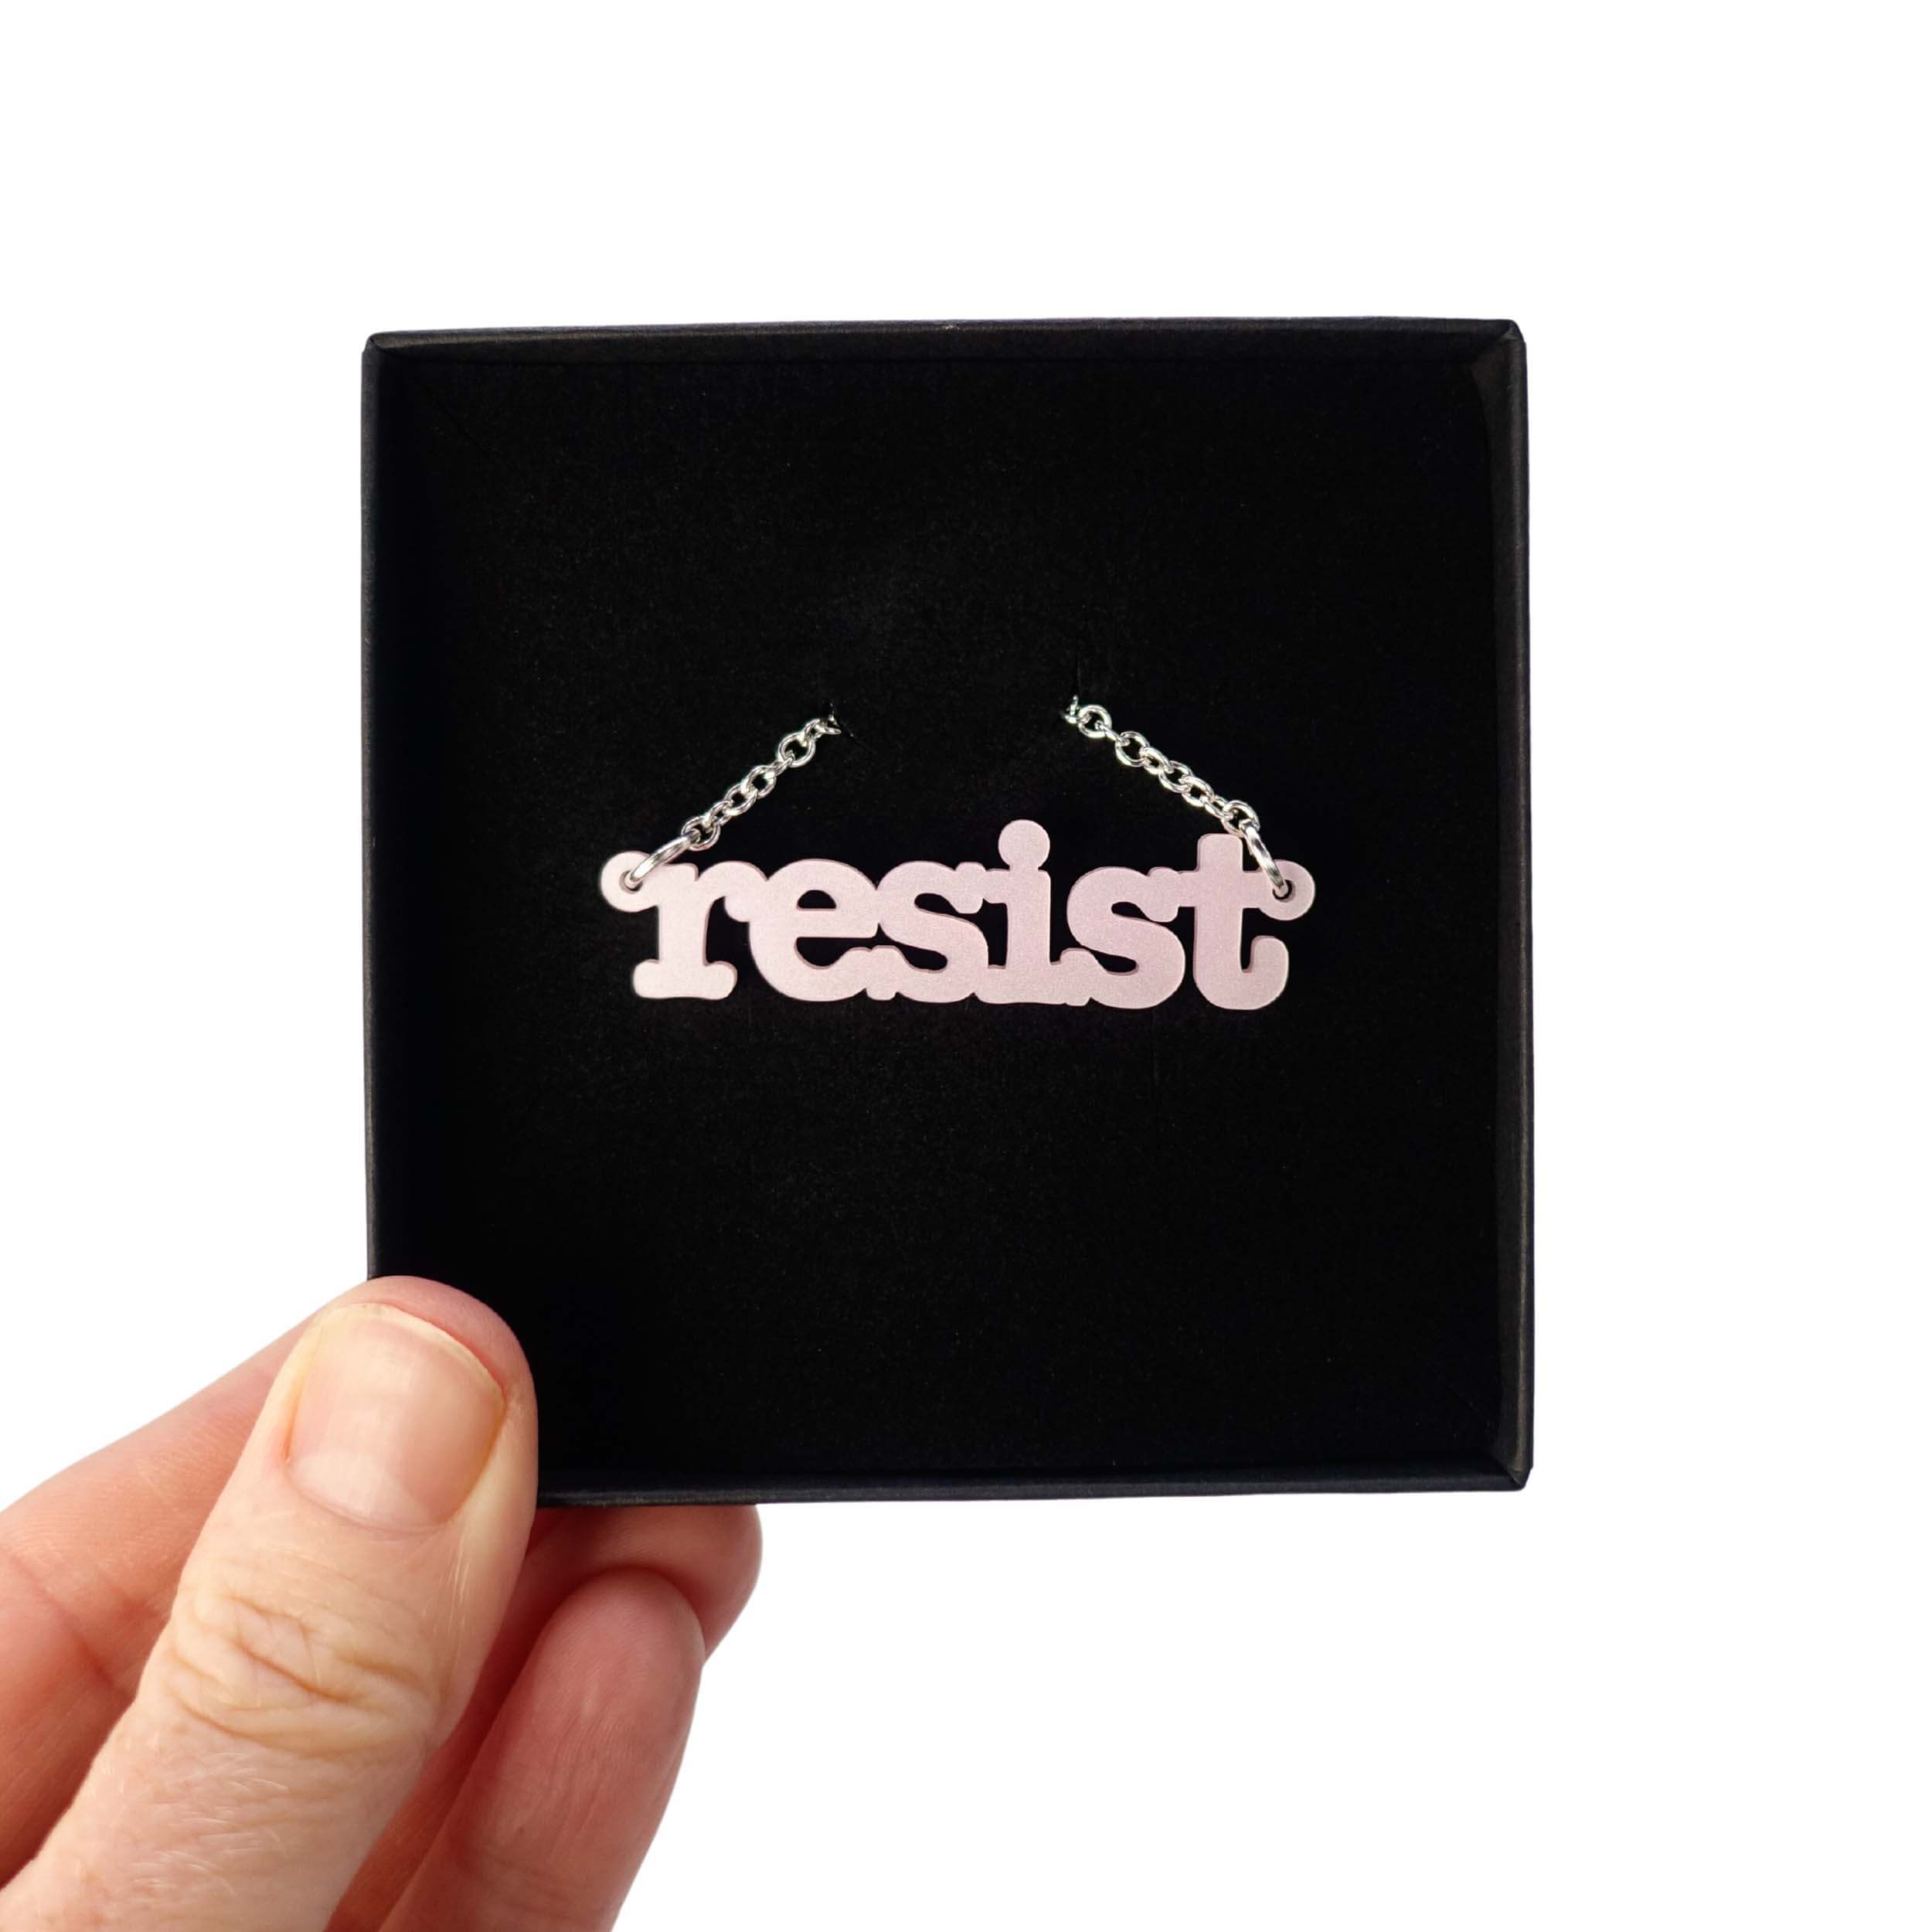 Shell pink Resist necklace in typewriter font shown in a Wear and Resist gift box. 